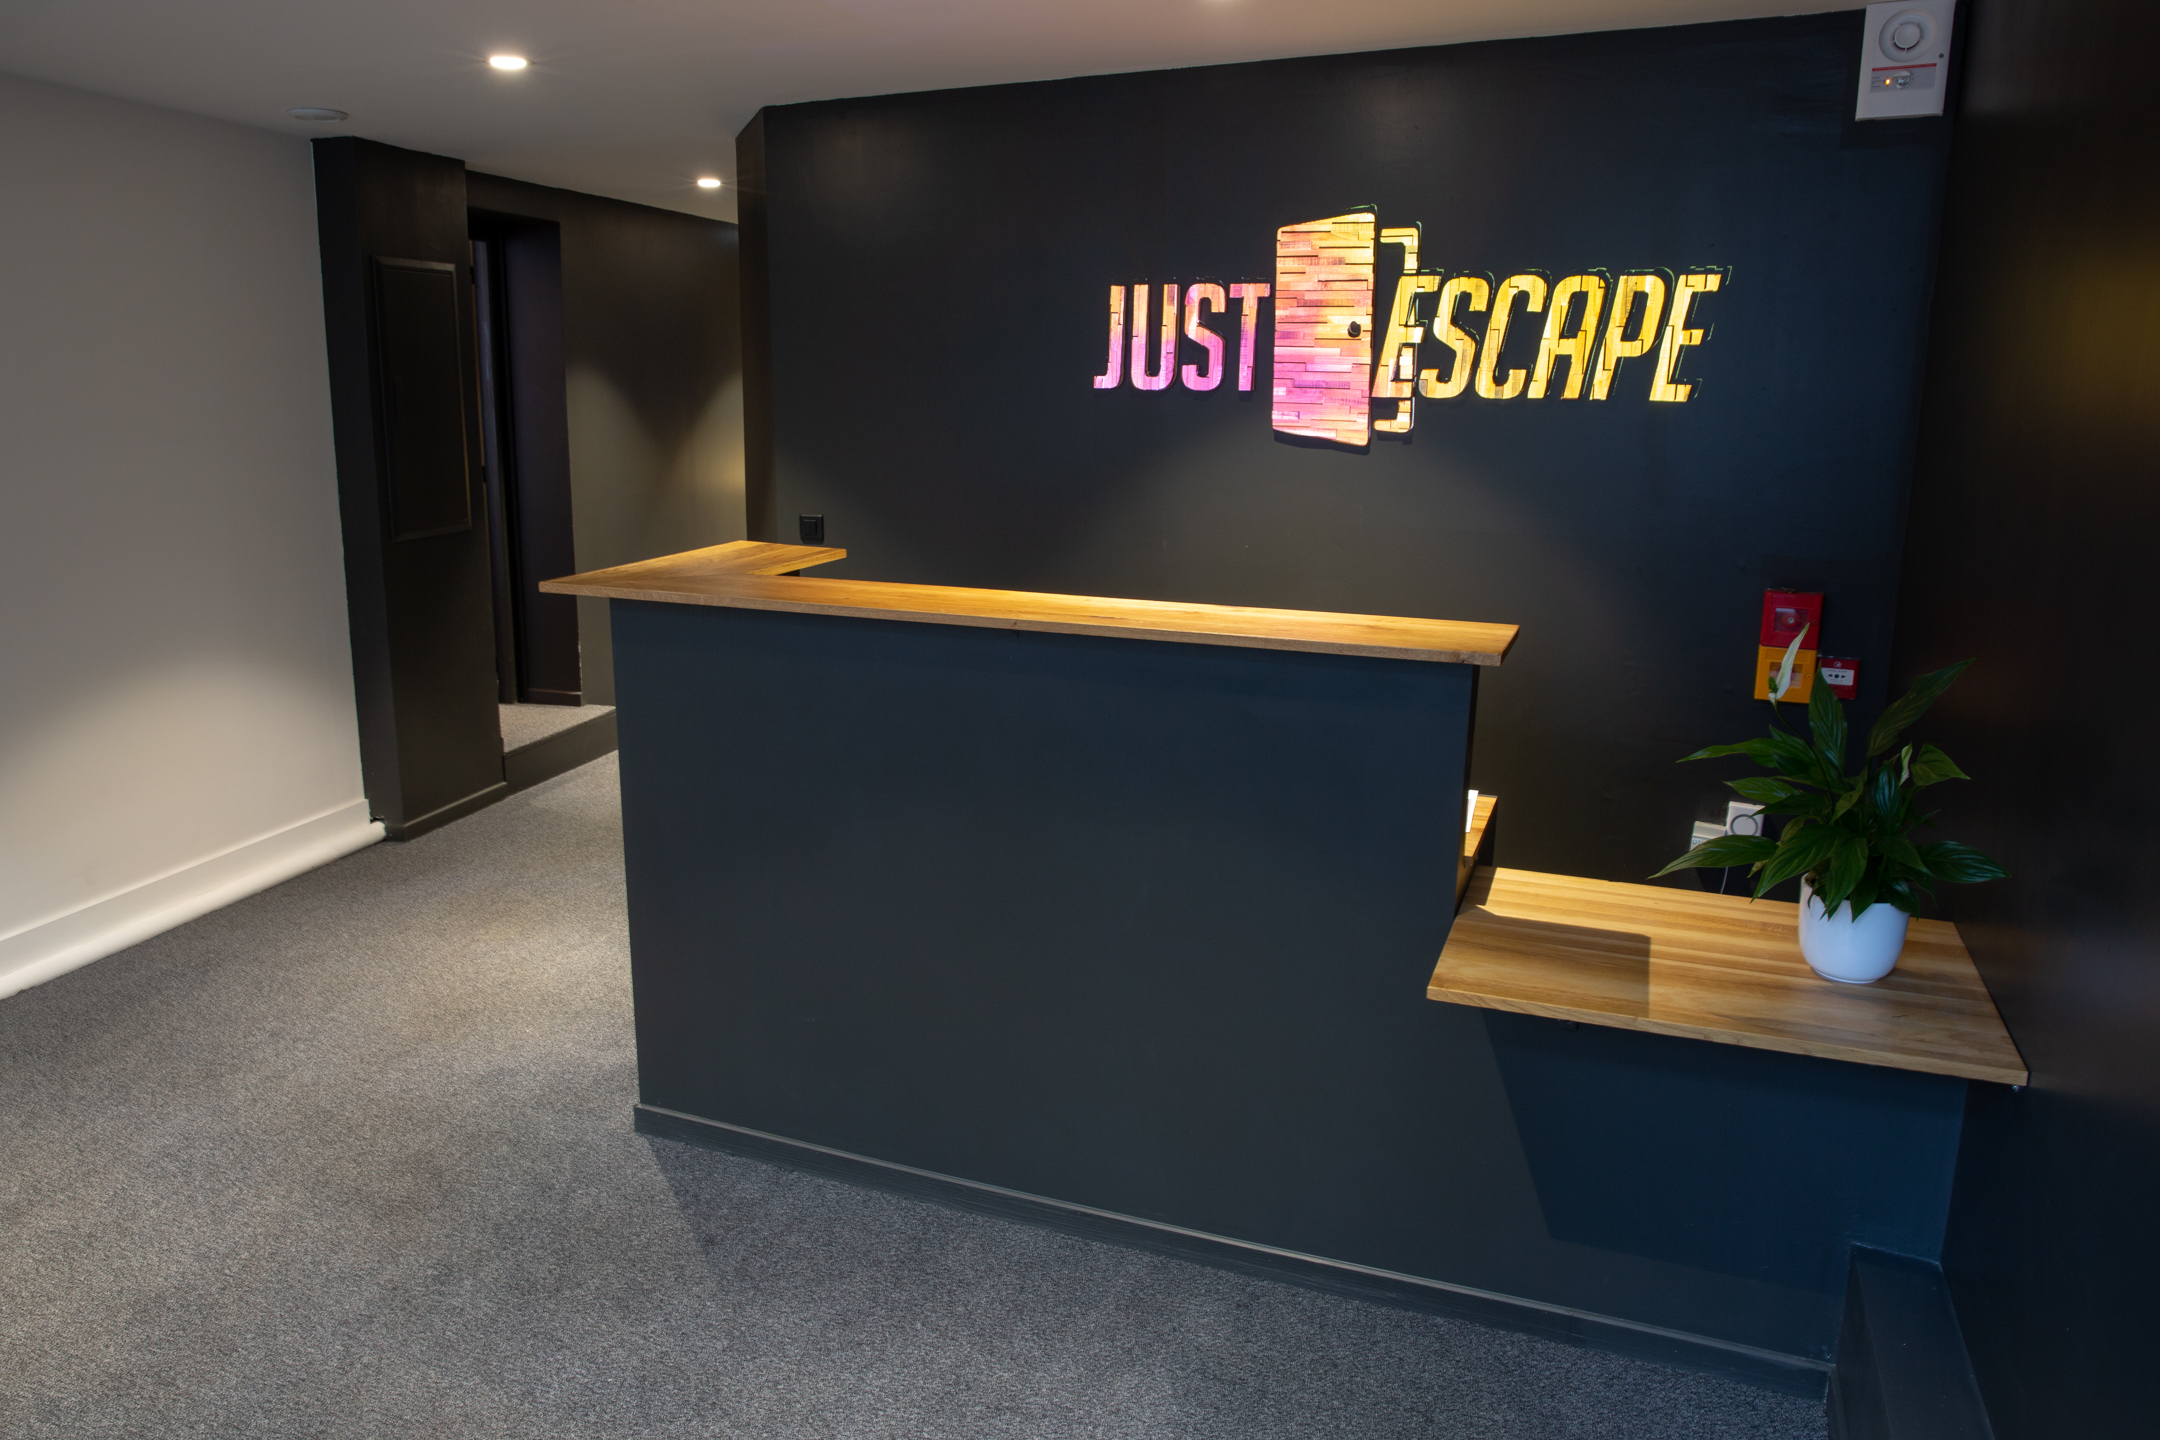 Meeting / Reception Room in an Escape Game